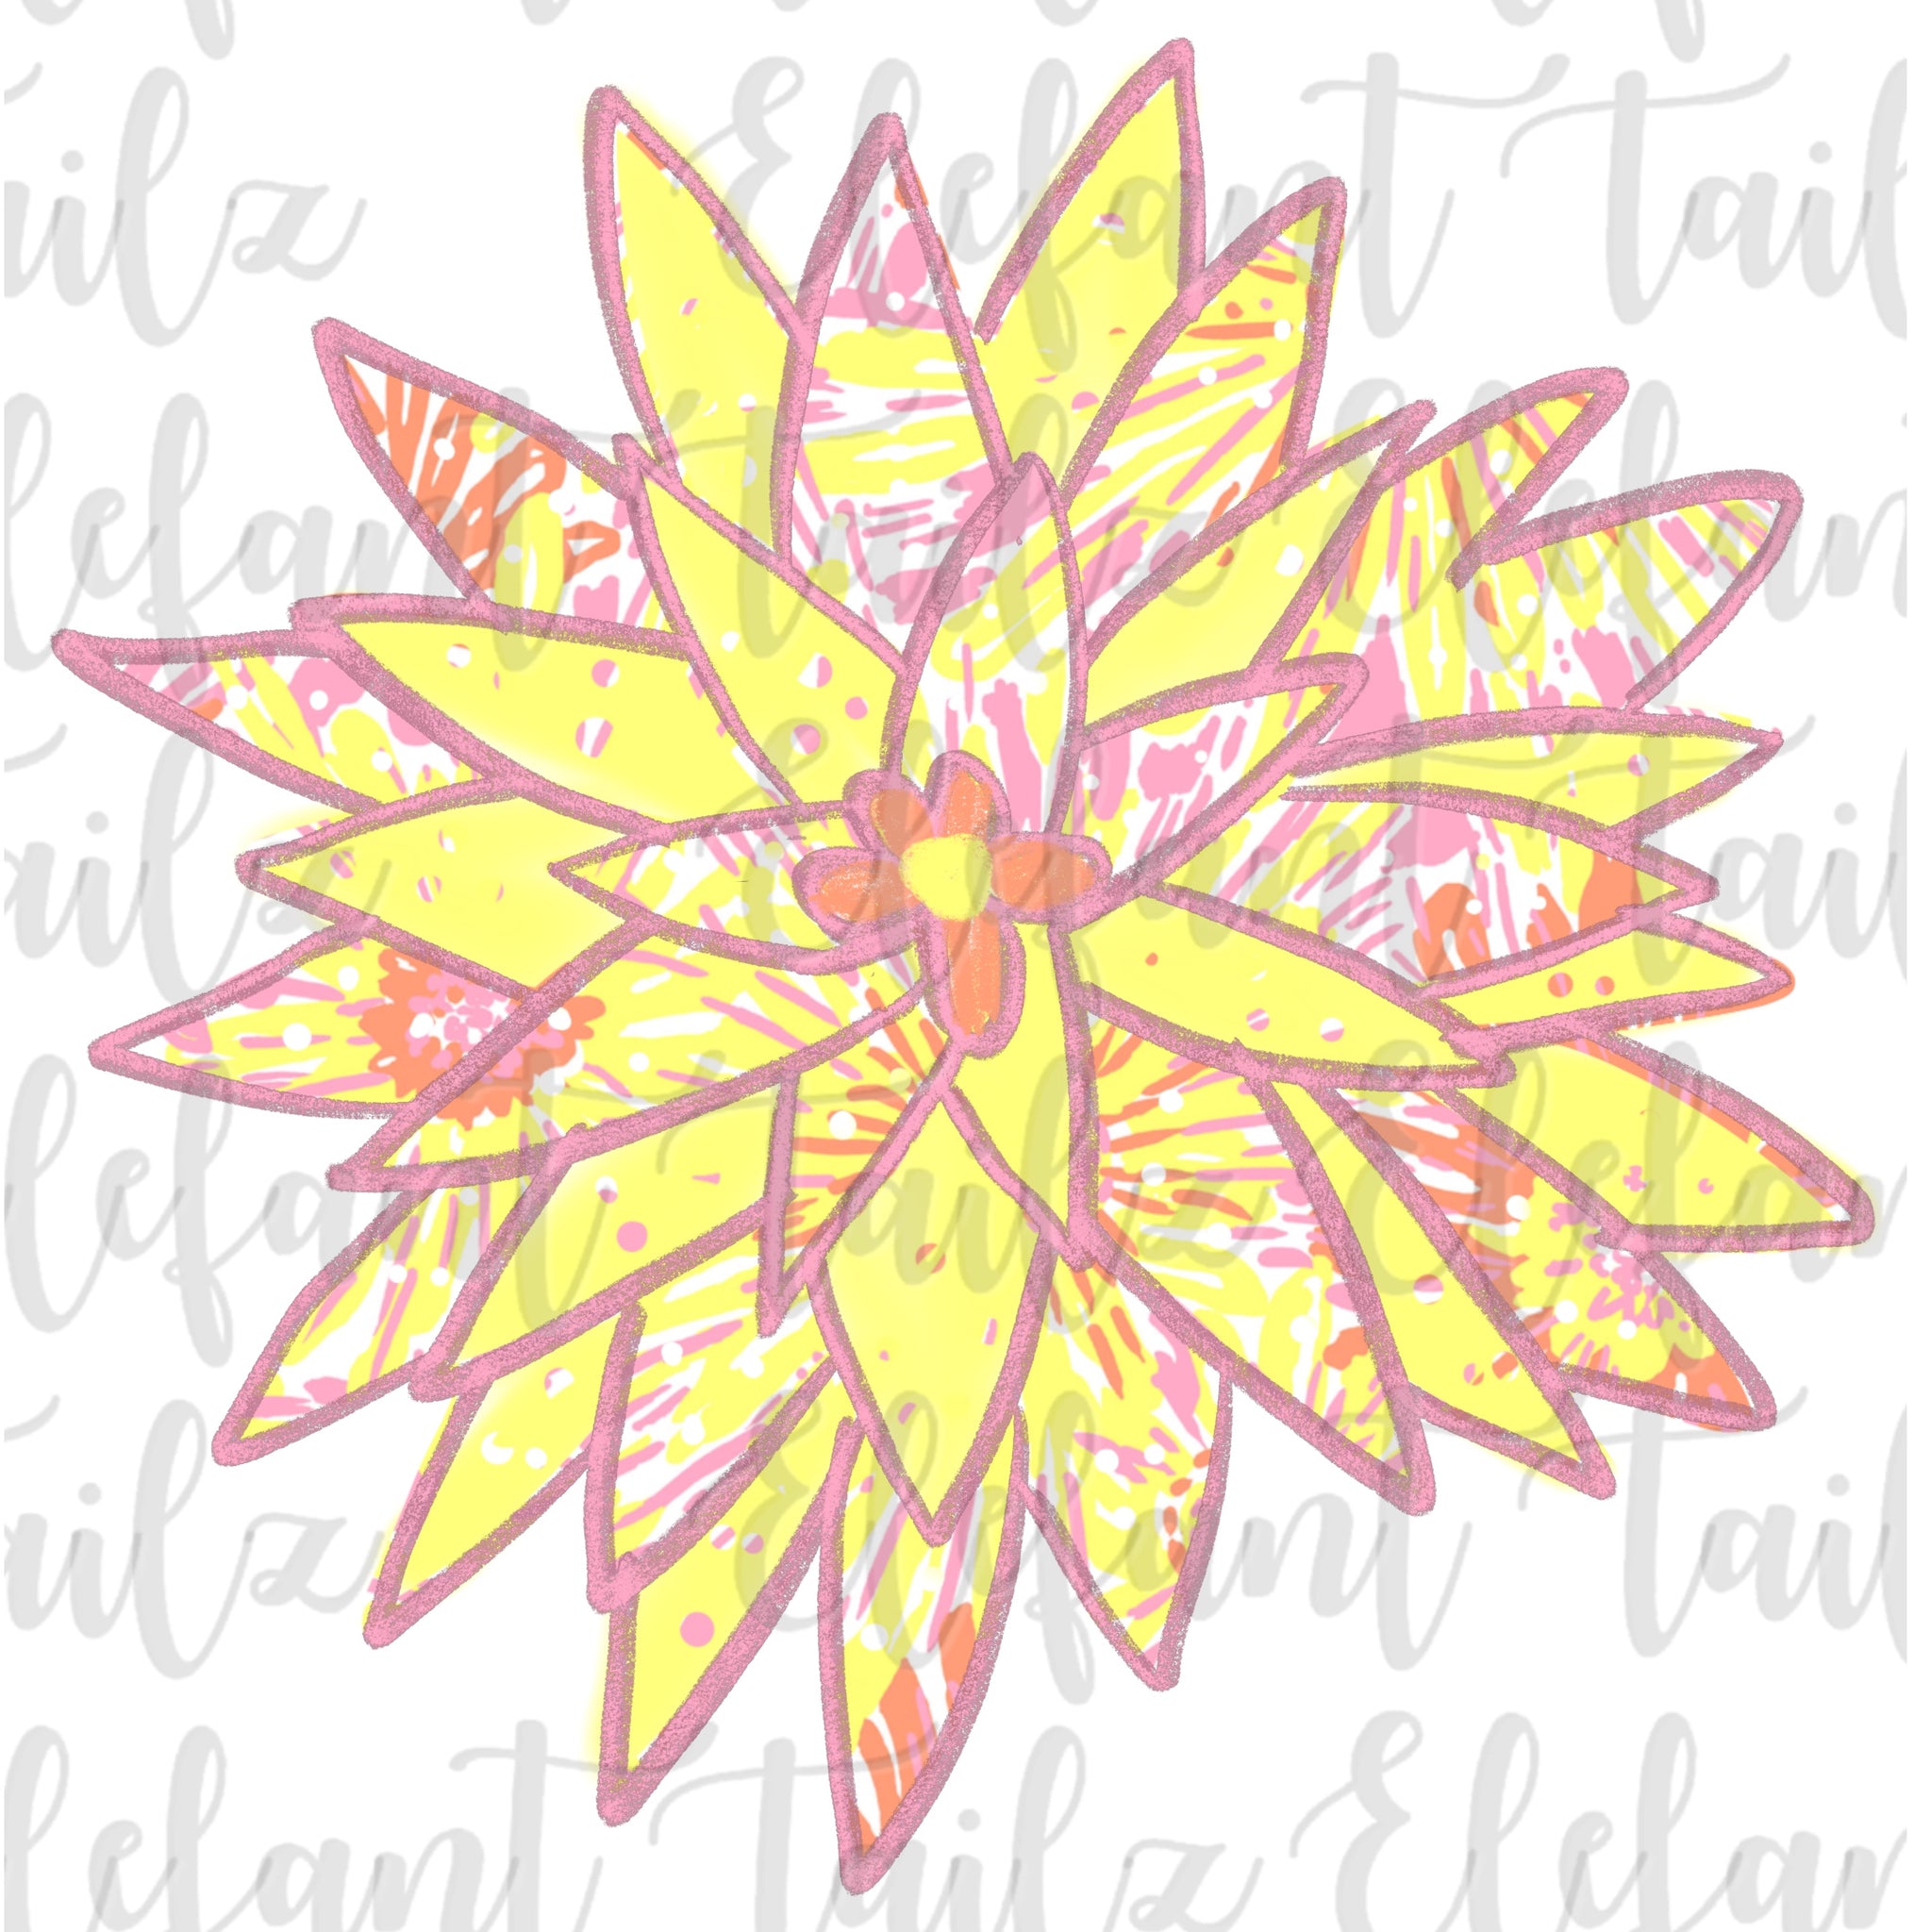 Lilly Pulitzer Sunkissed Flower #3